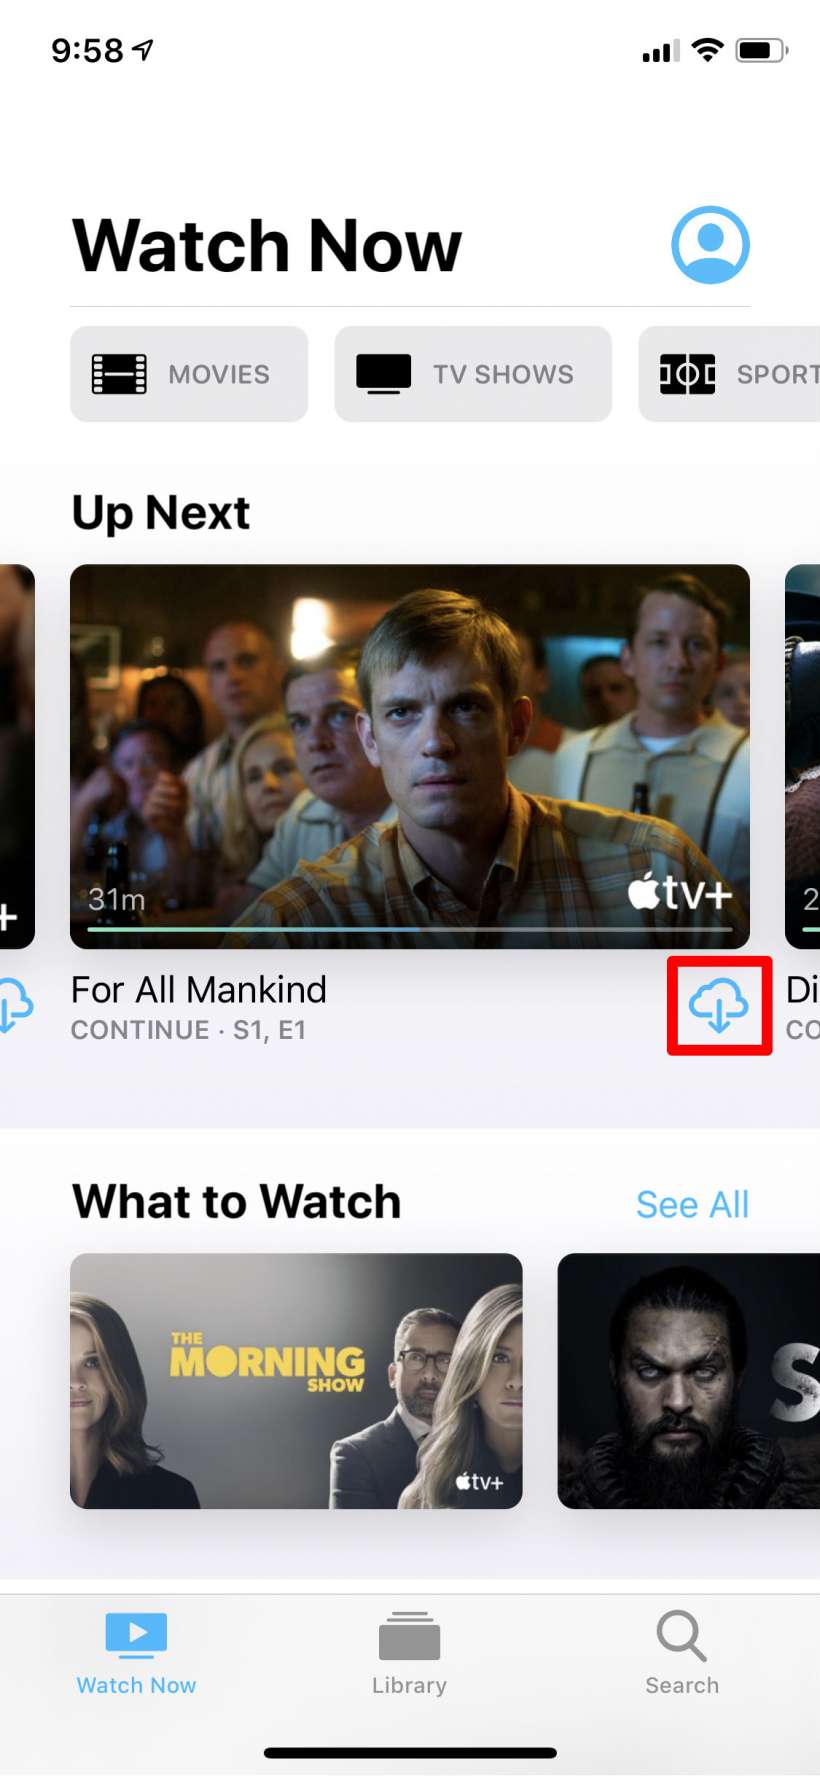 How to download Apple TV+ movies and TV shows to watch offline on iPhone, iPad, iPod Touch and Mac.